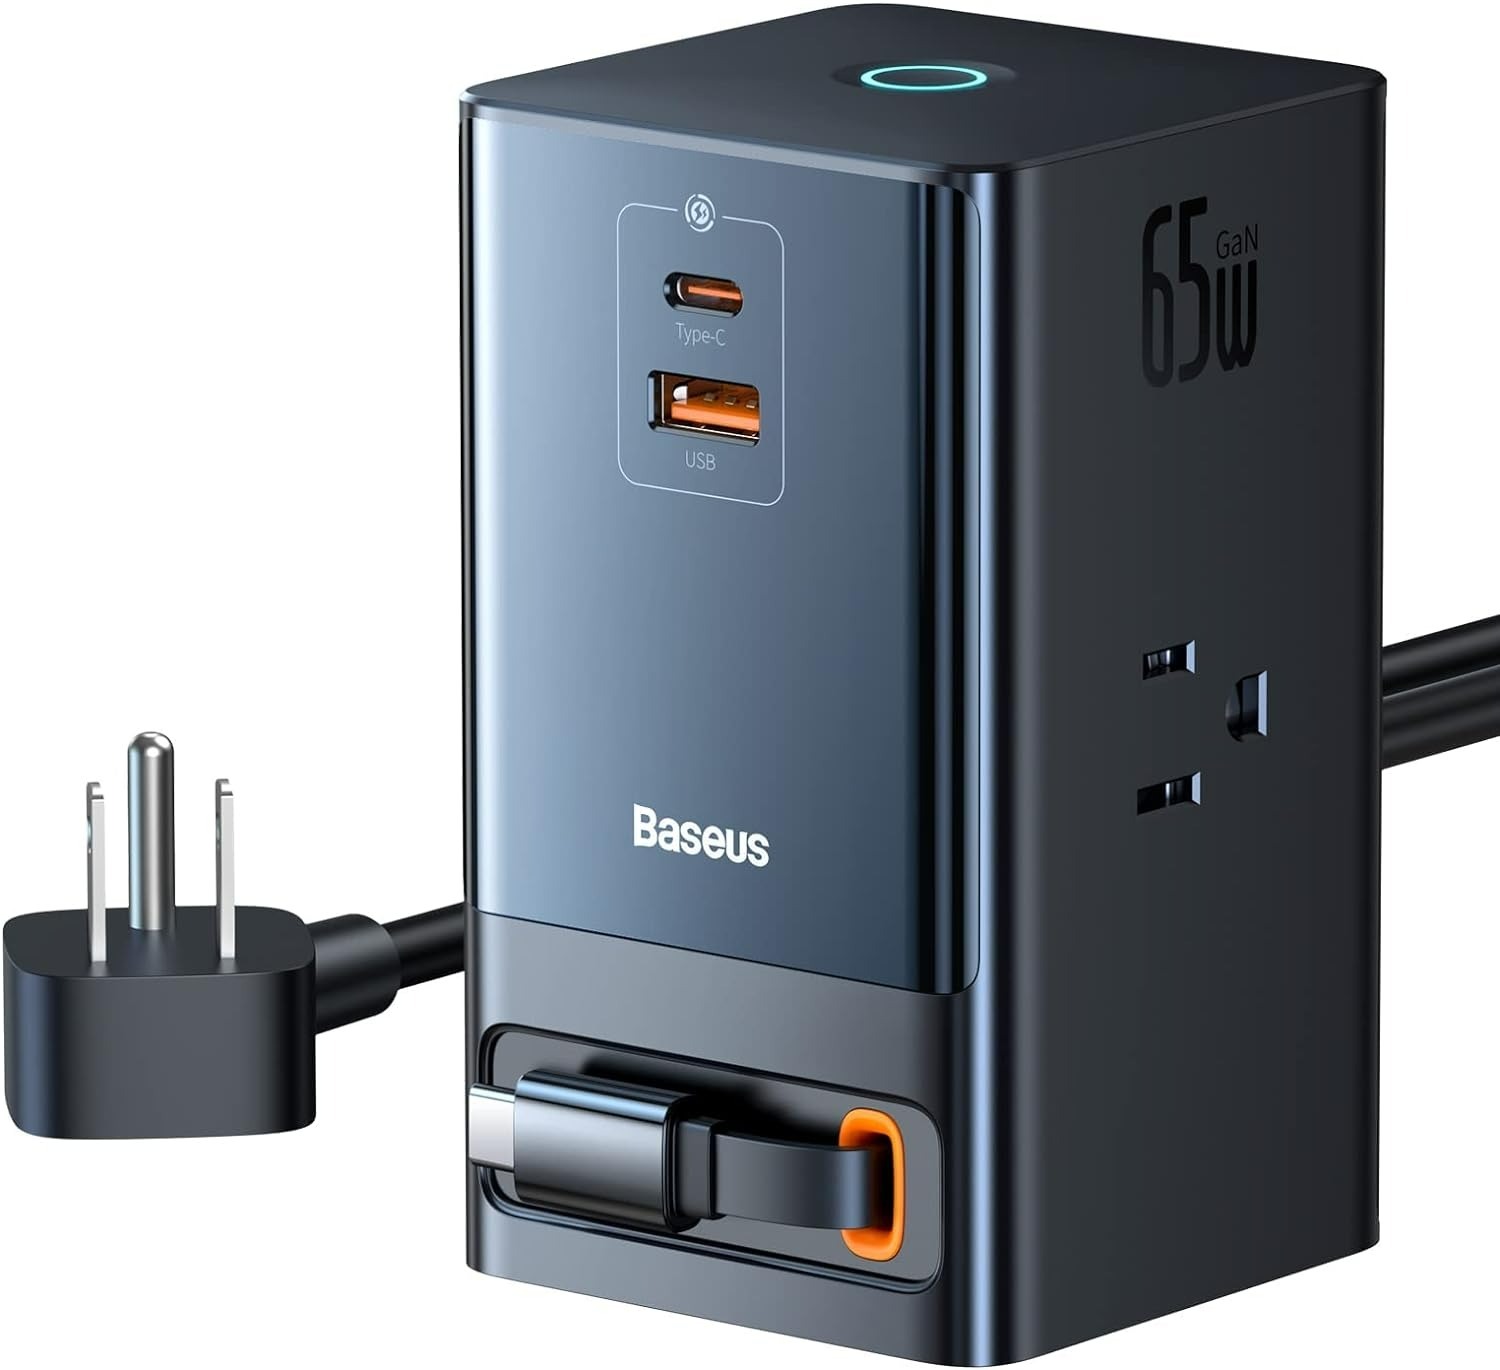 Baseus 6-in-1 65W Power Strip w/ Retractable USB-C Cable $40 + Free Shipping